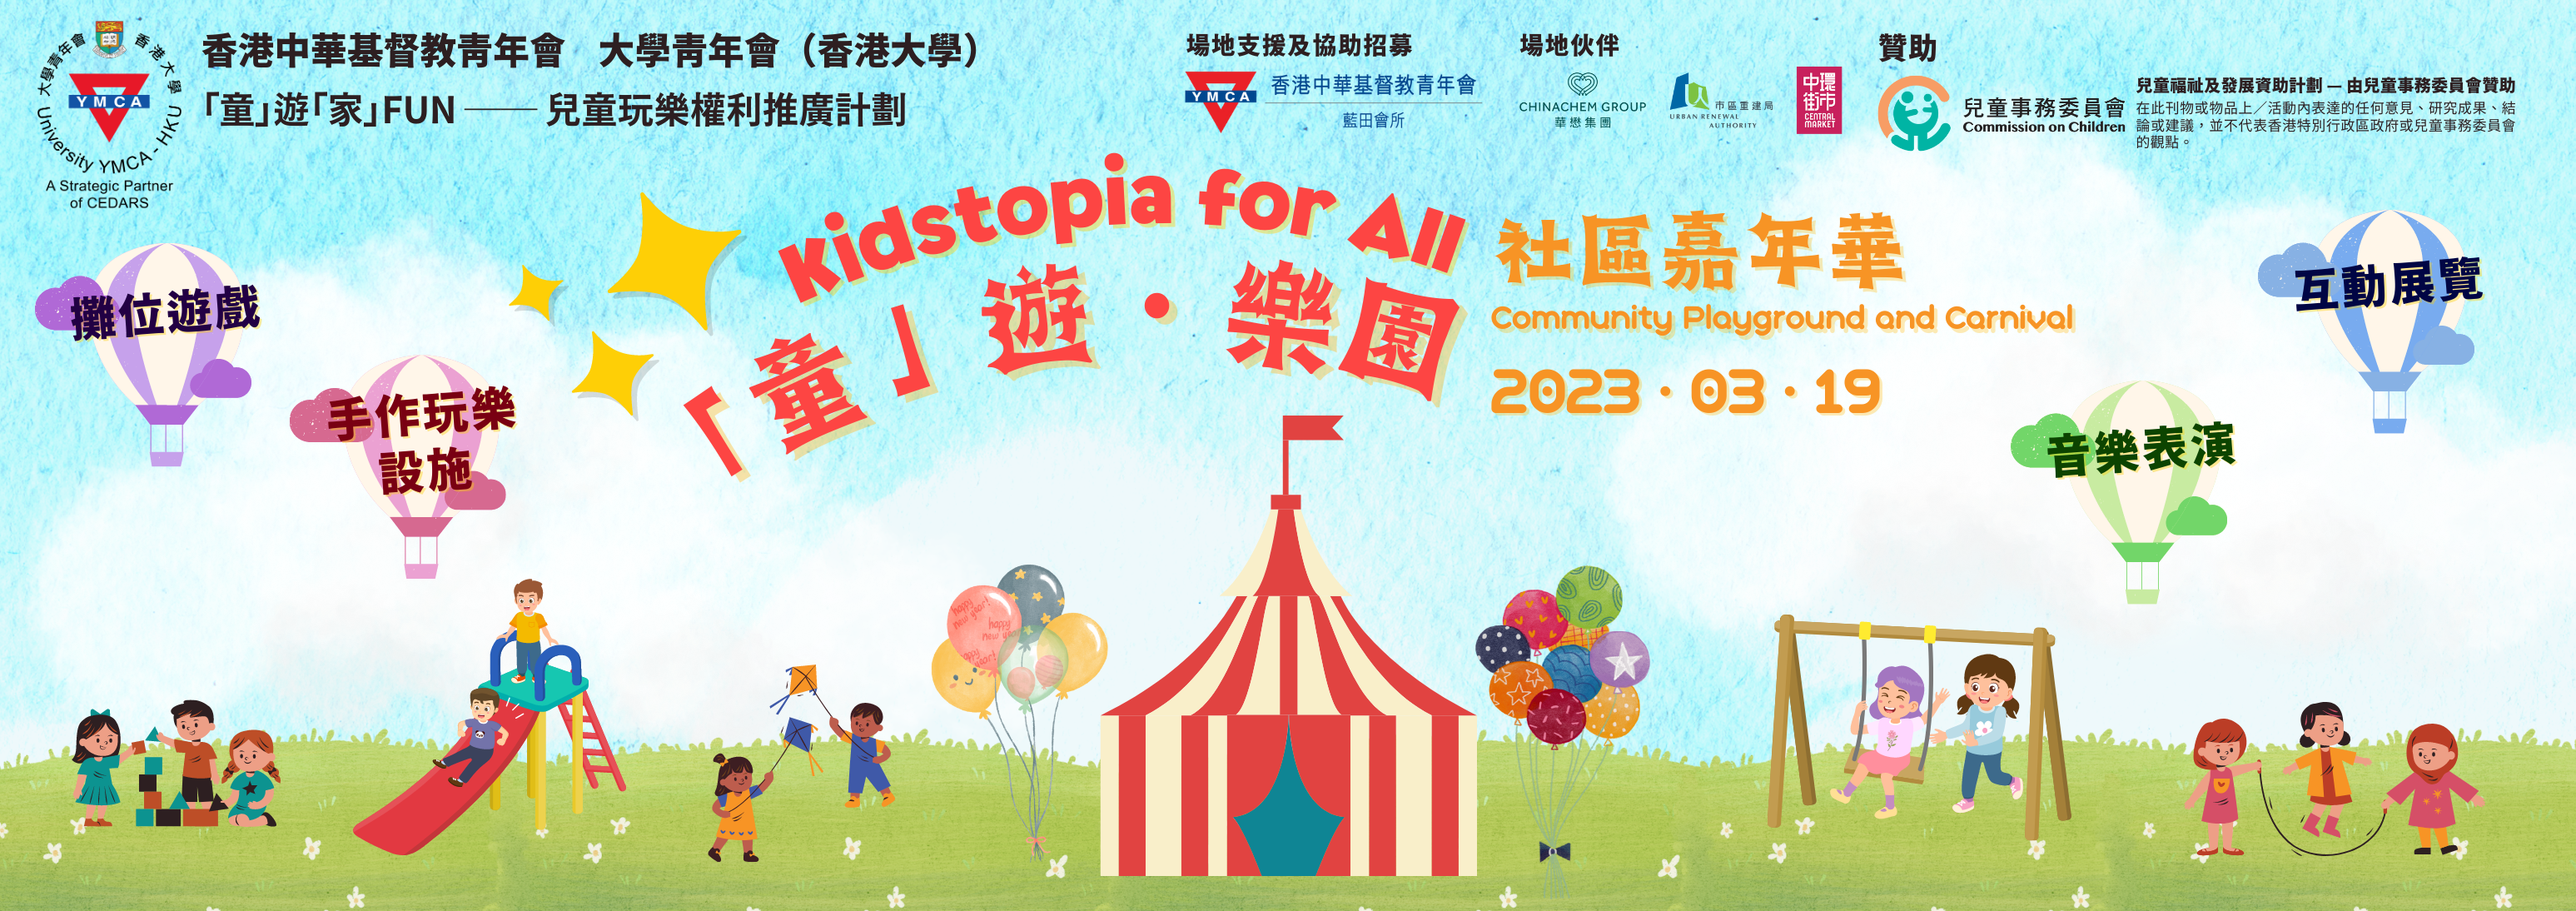 "Kidstopia for All" Community Playground and Carnival